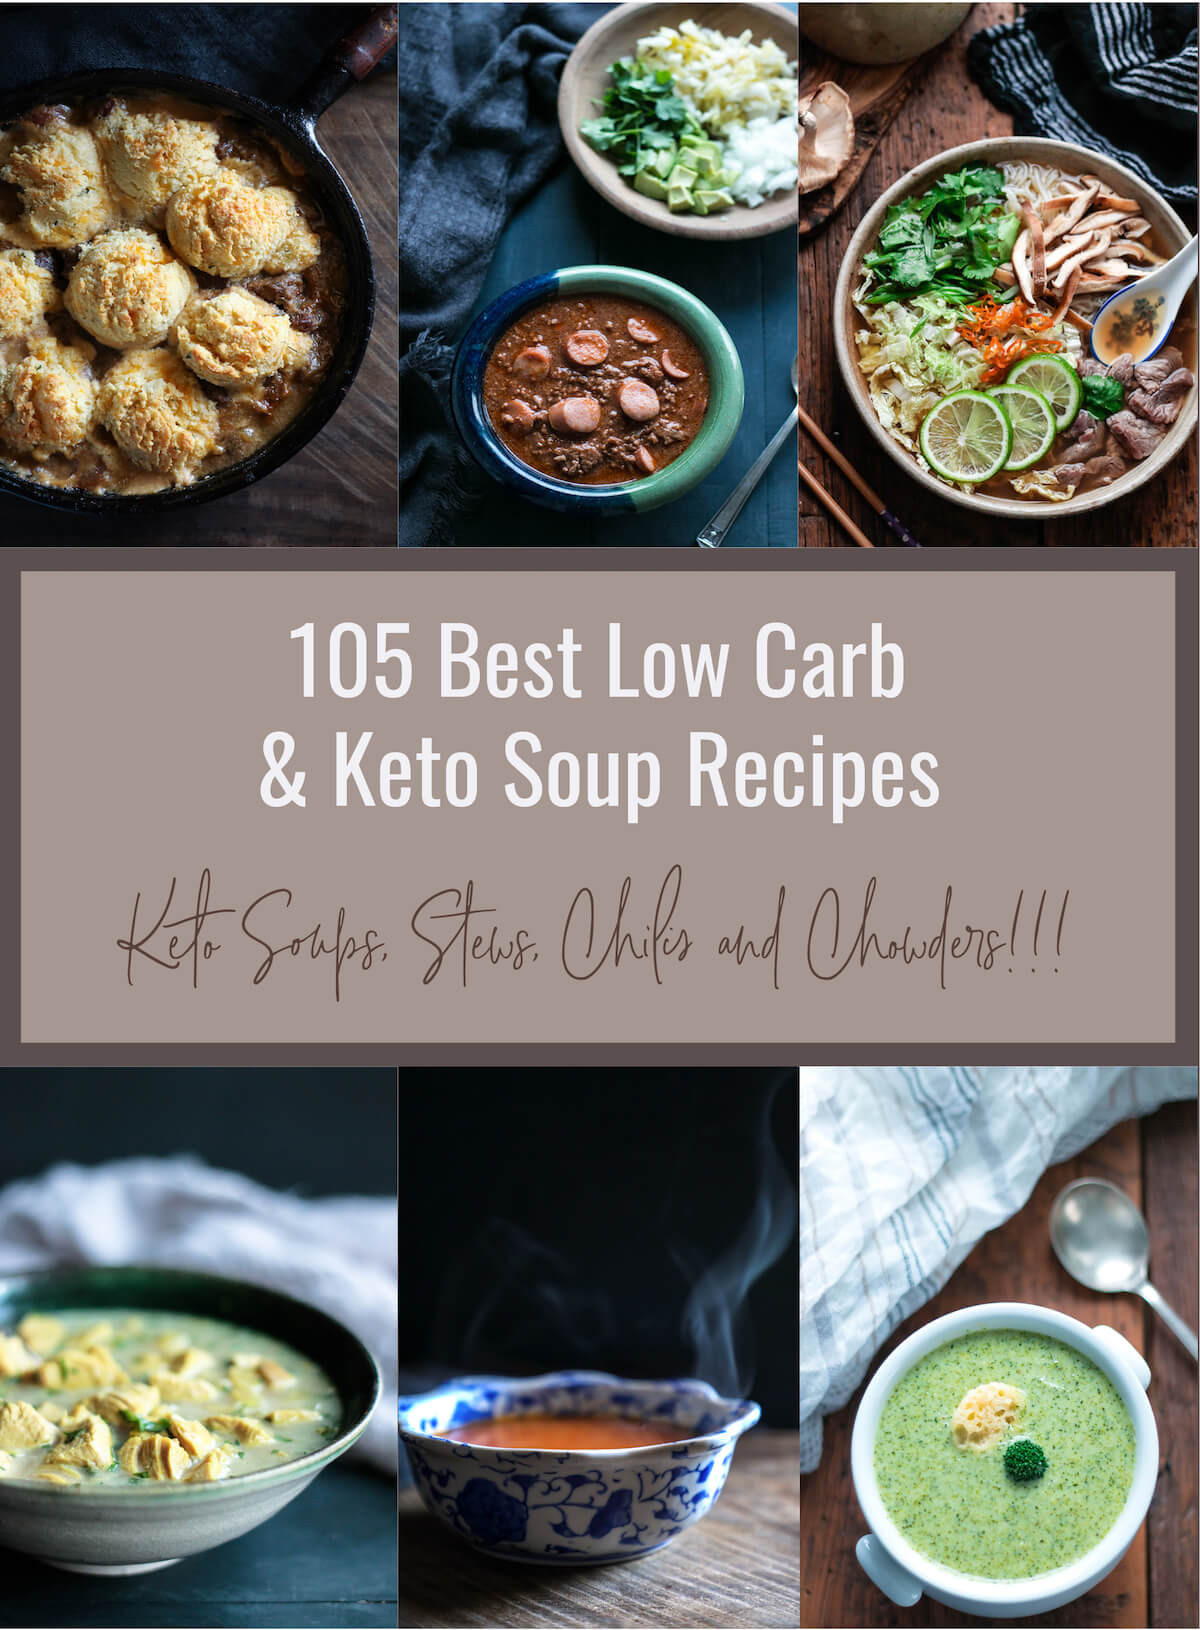 Low Carb Fall Recipes
 30 the Best Ideas for Low Carb Fall Recipes Best